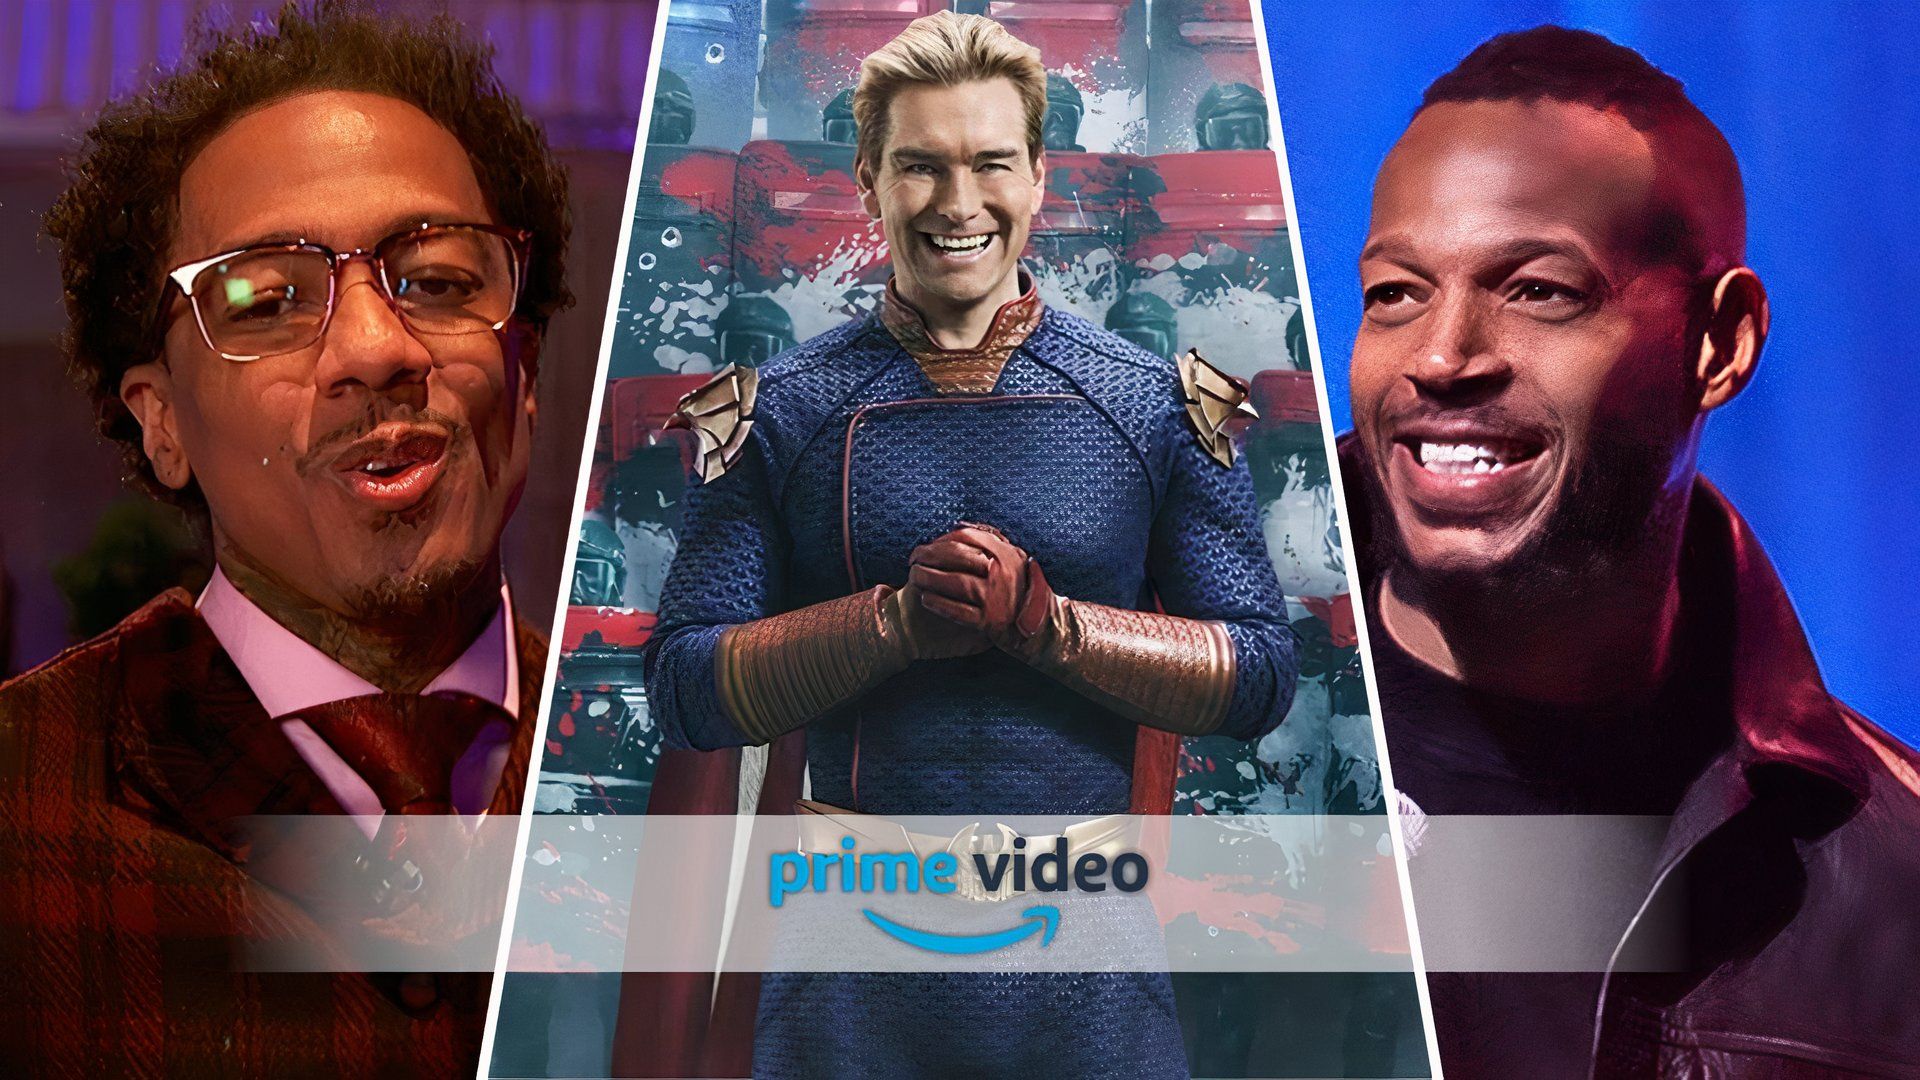 An edited image of Marlon Wayans: Good Grief, Counsel Culture, and The Boys with the Prime Video logo